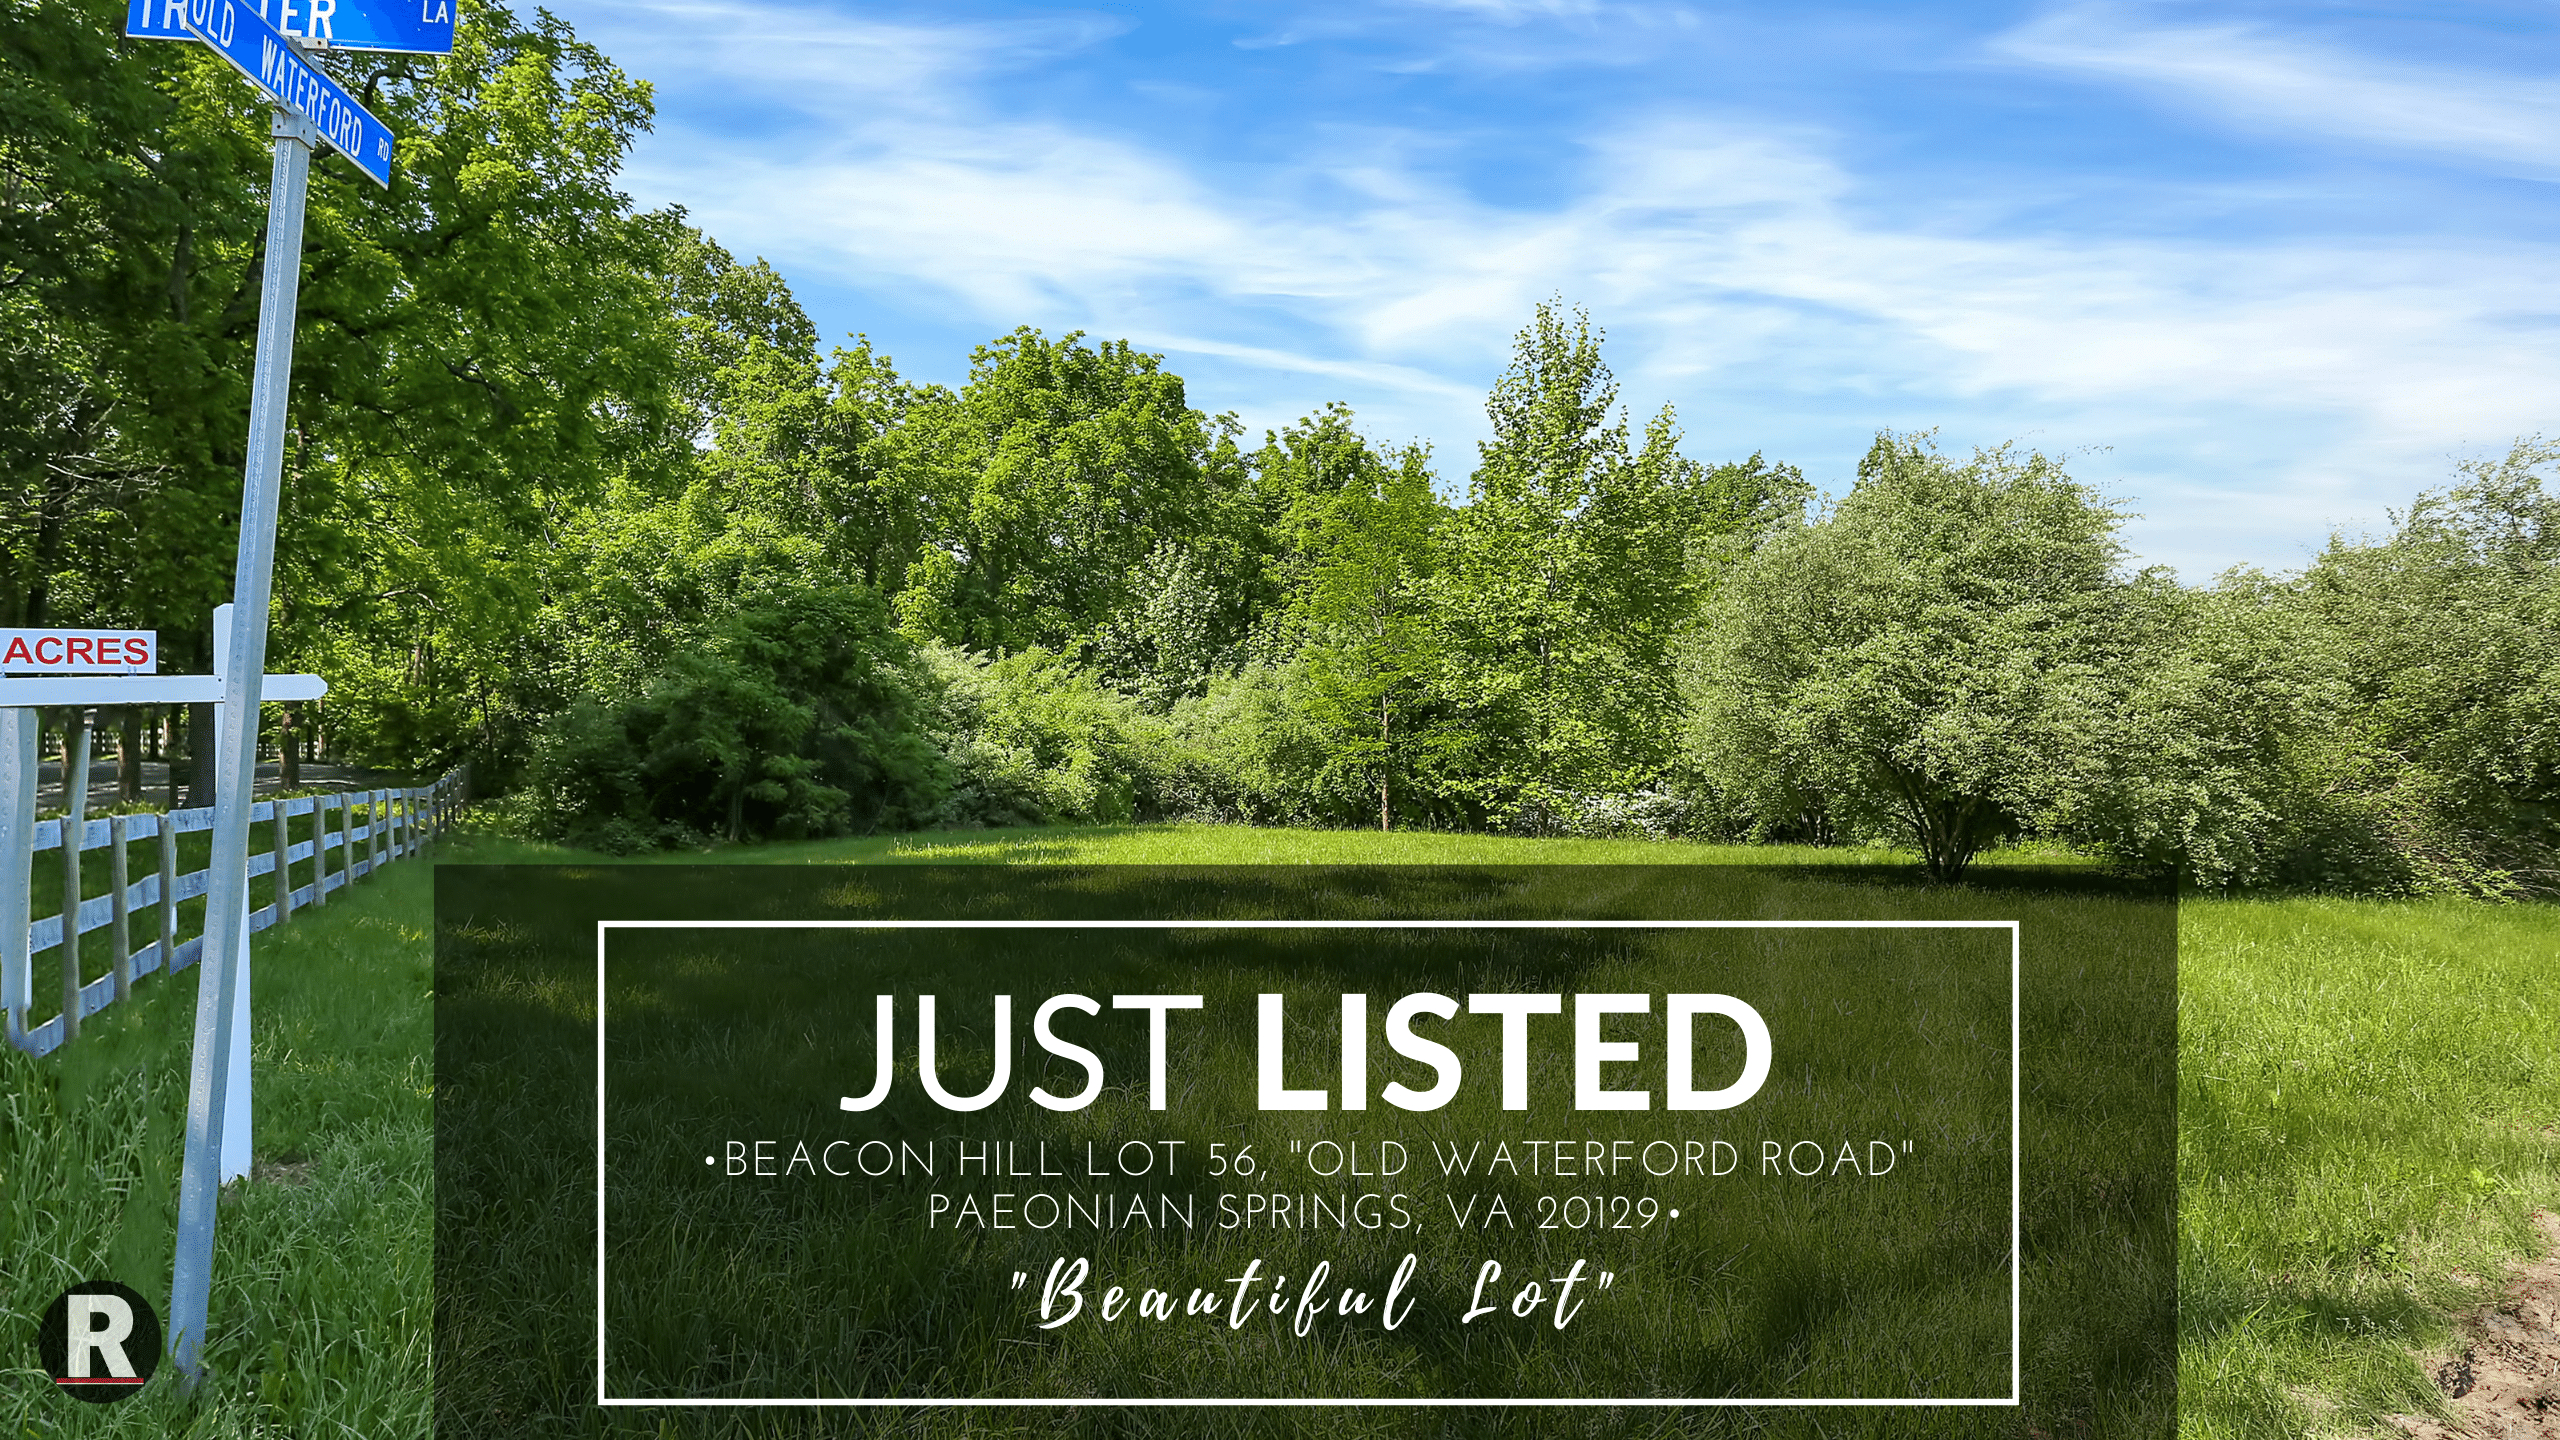 Beacon Hill Lot 56, “Old Waterford Road” Paeonian Springs, VA 20129